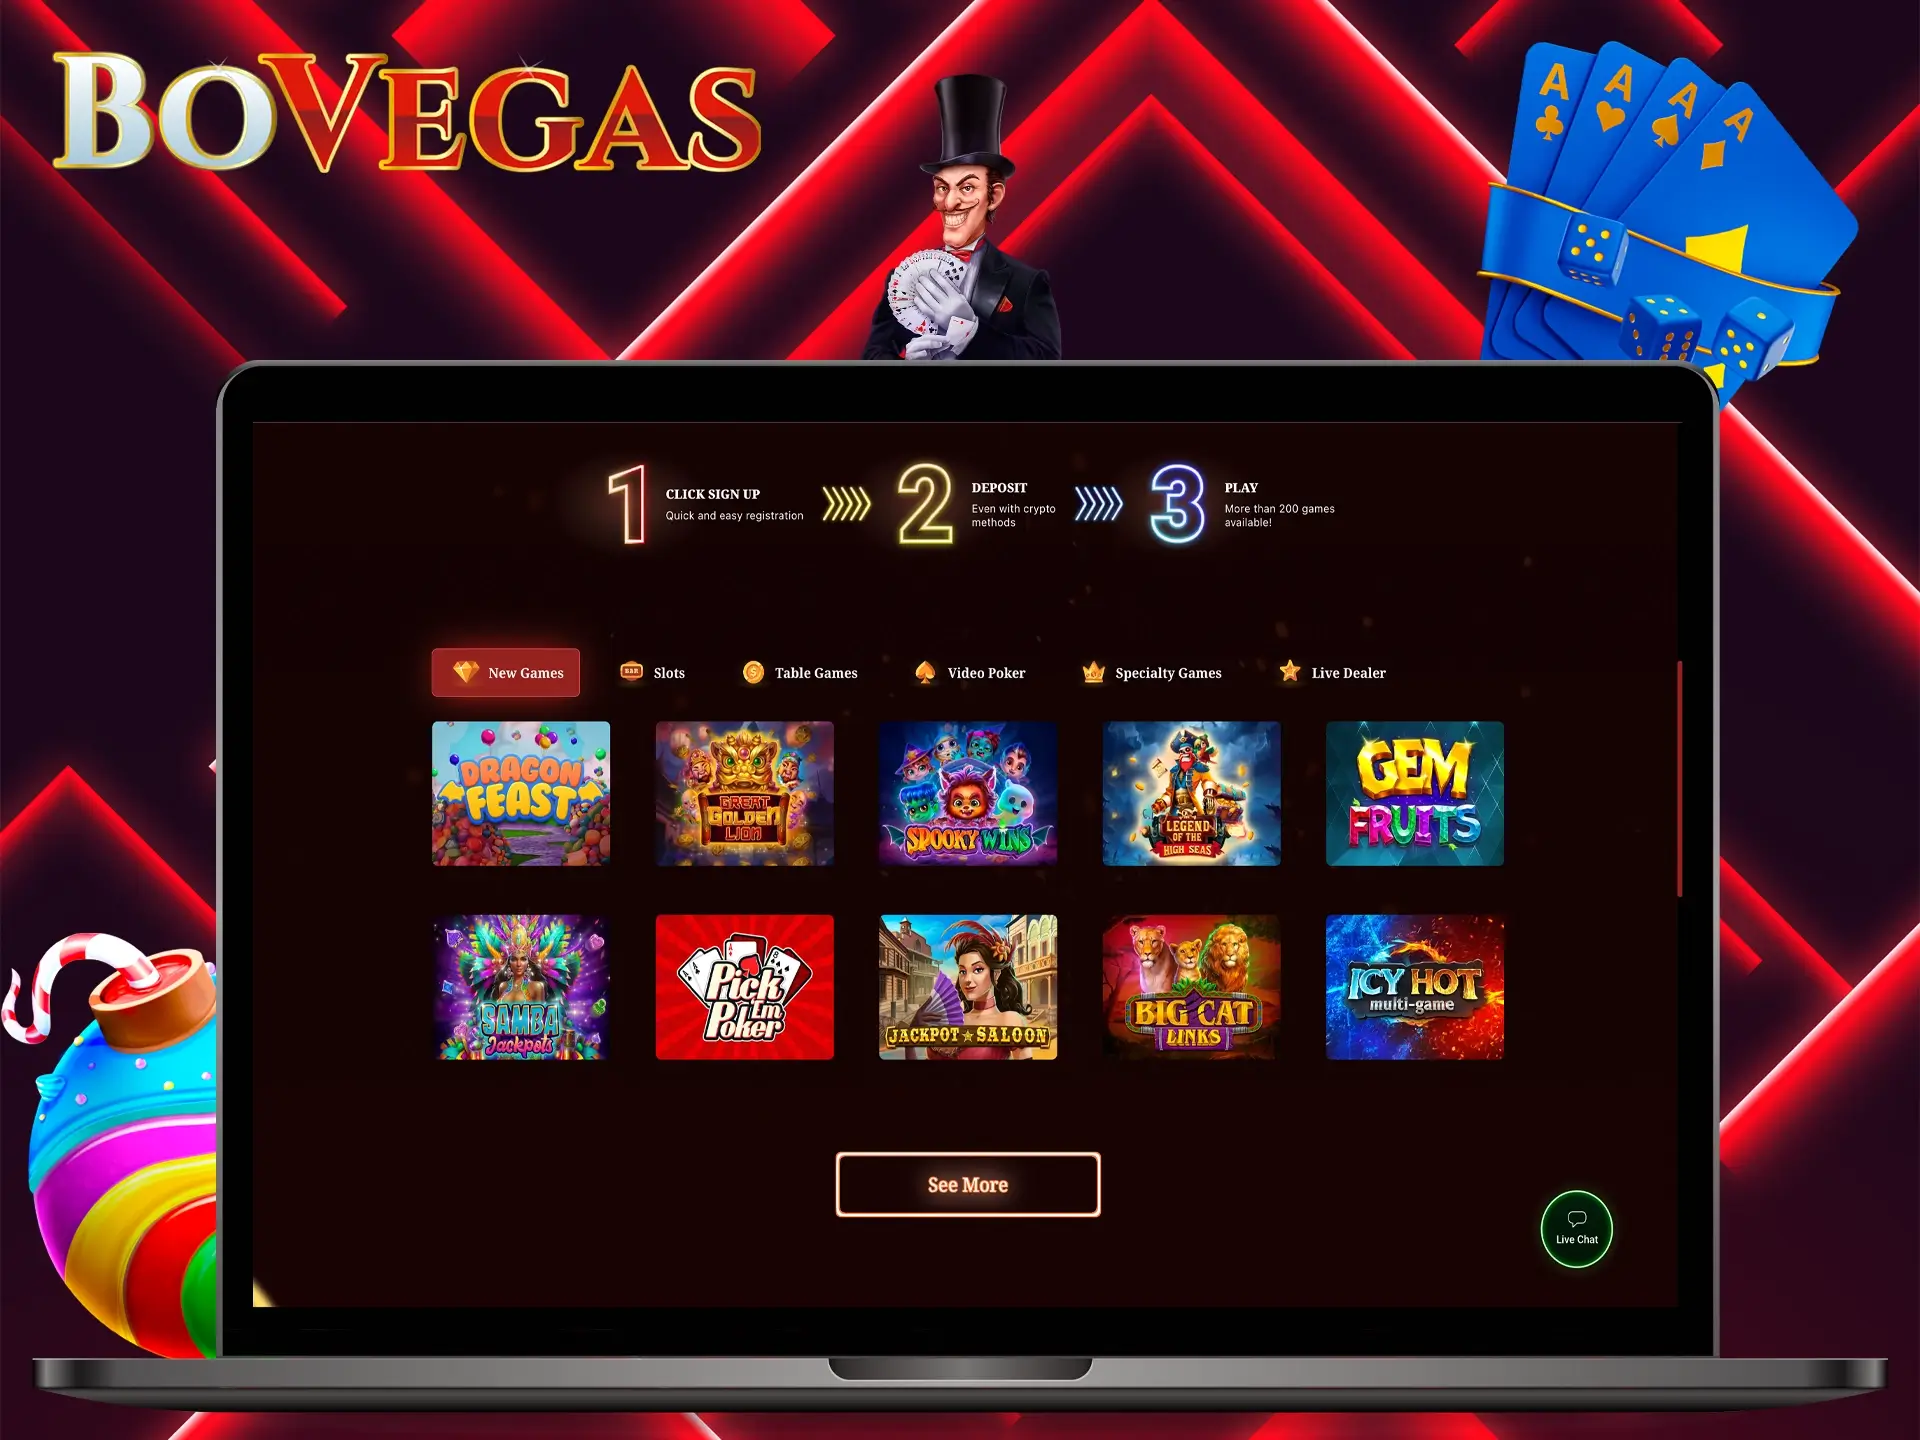 At BoVegas Casino anyone can find entertainment to their liking.